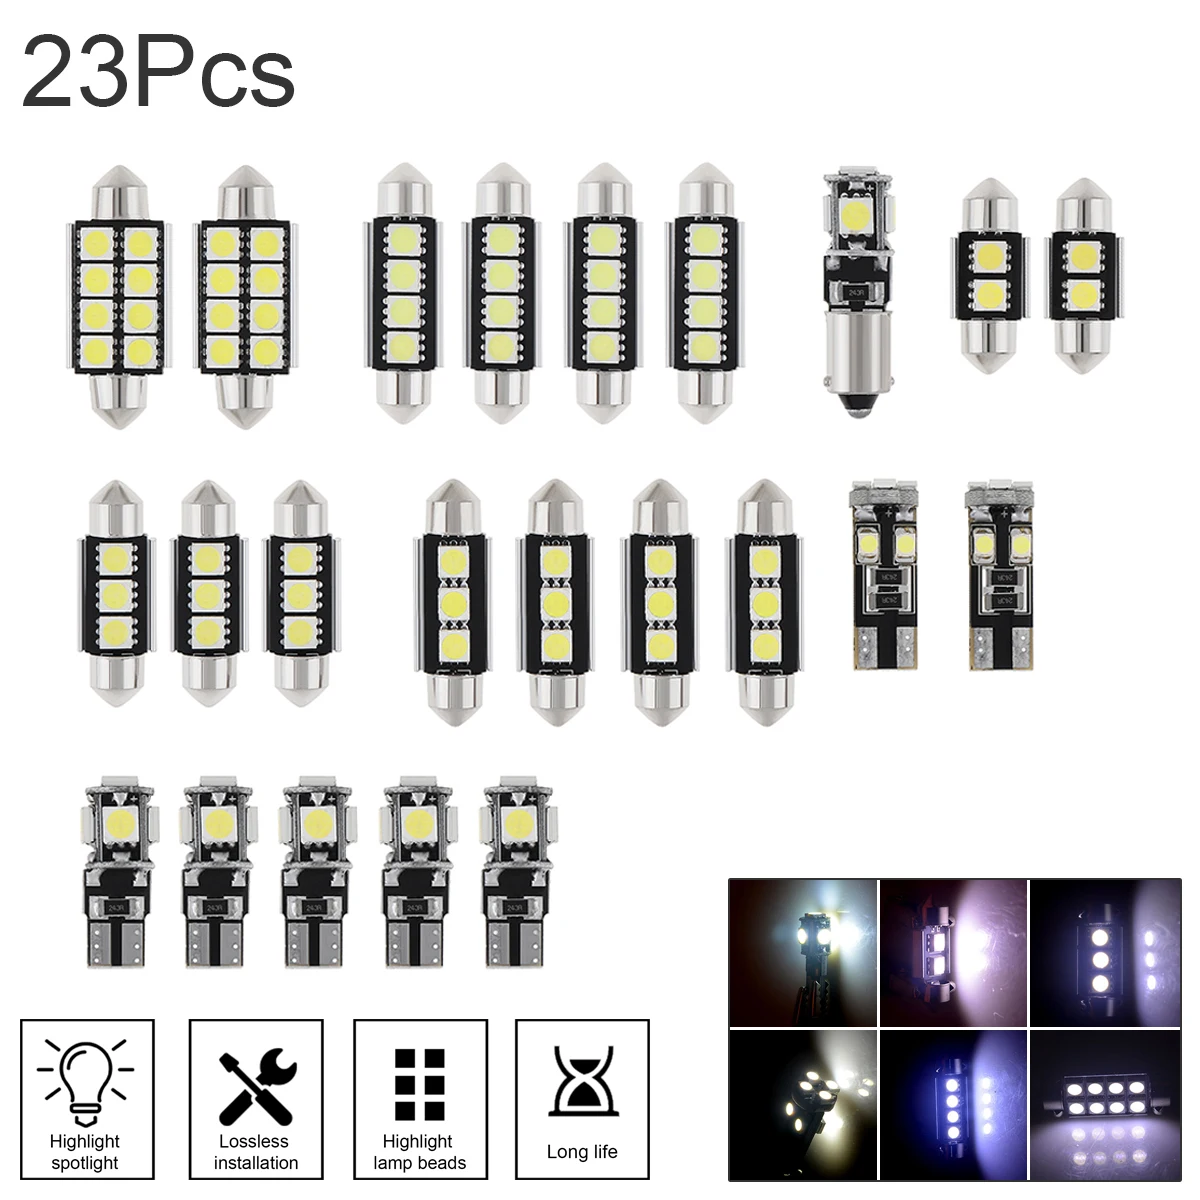 

23pcs T10 5050 W5W 6000K 600Lm White Color Canbus LED Car Interior Inside Light Dome Trunk Map License Plate Lamp Bulb for Car